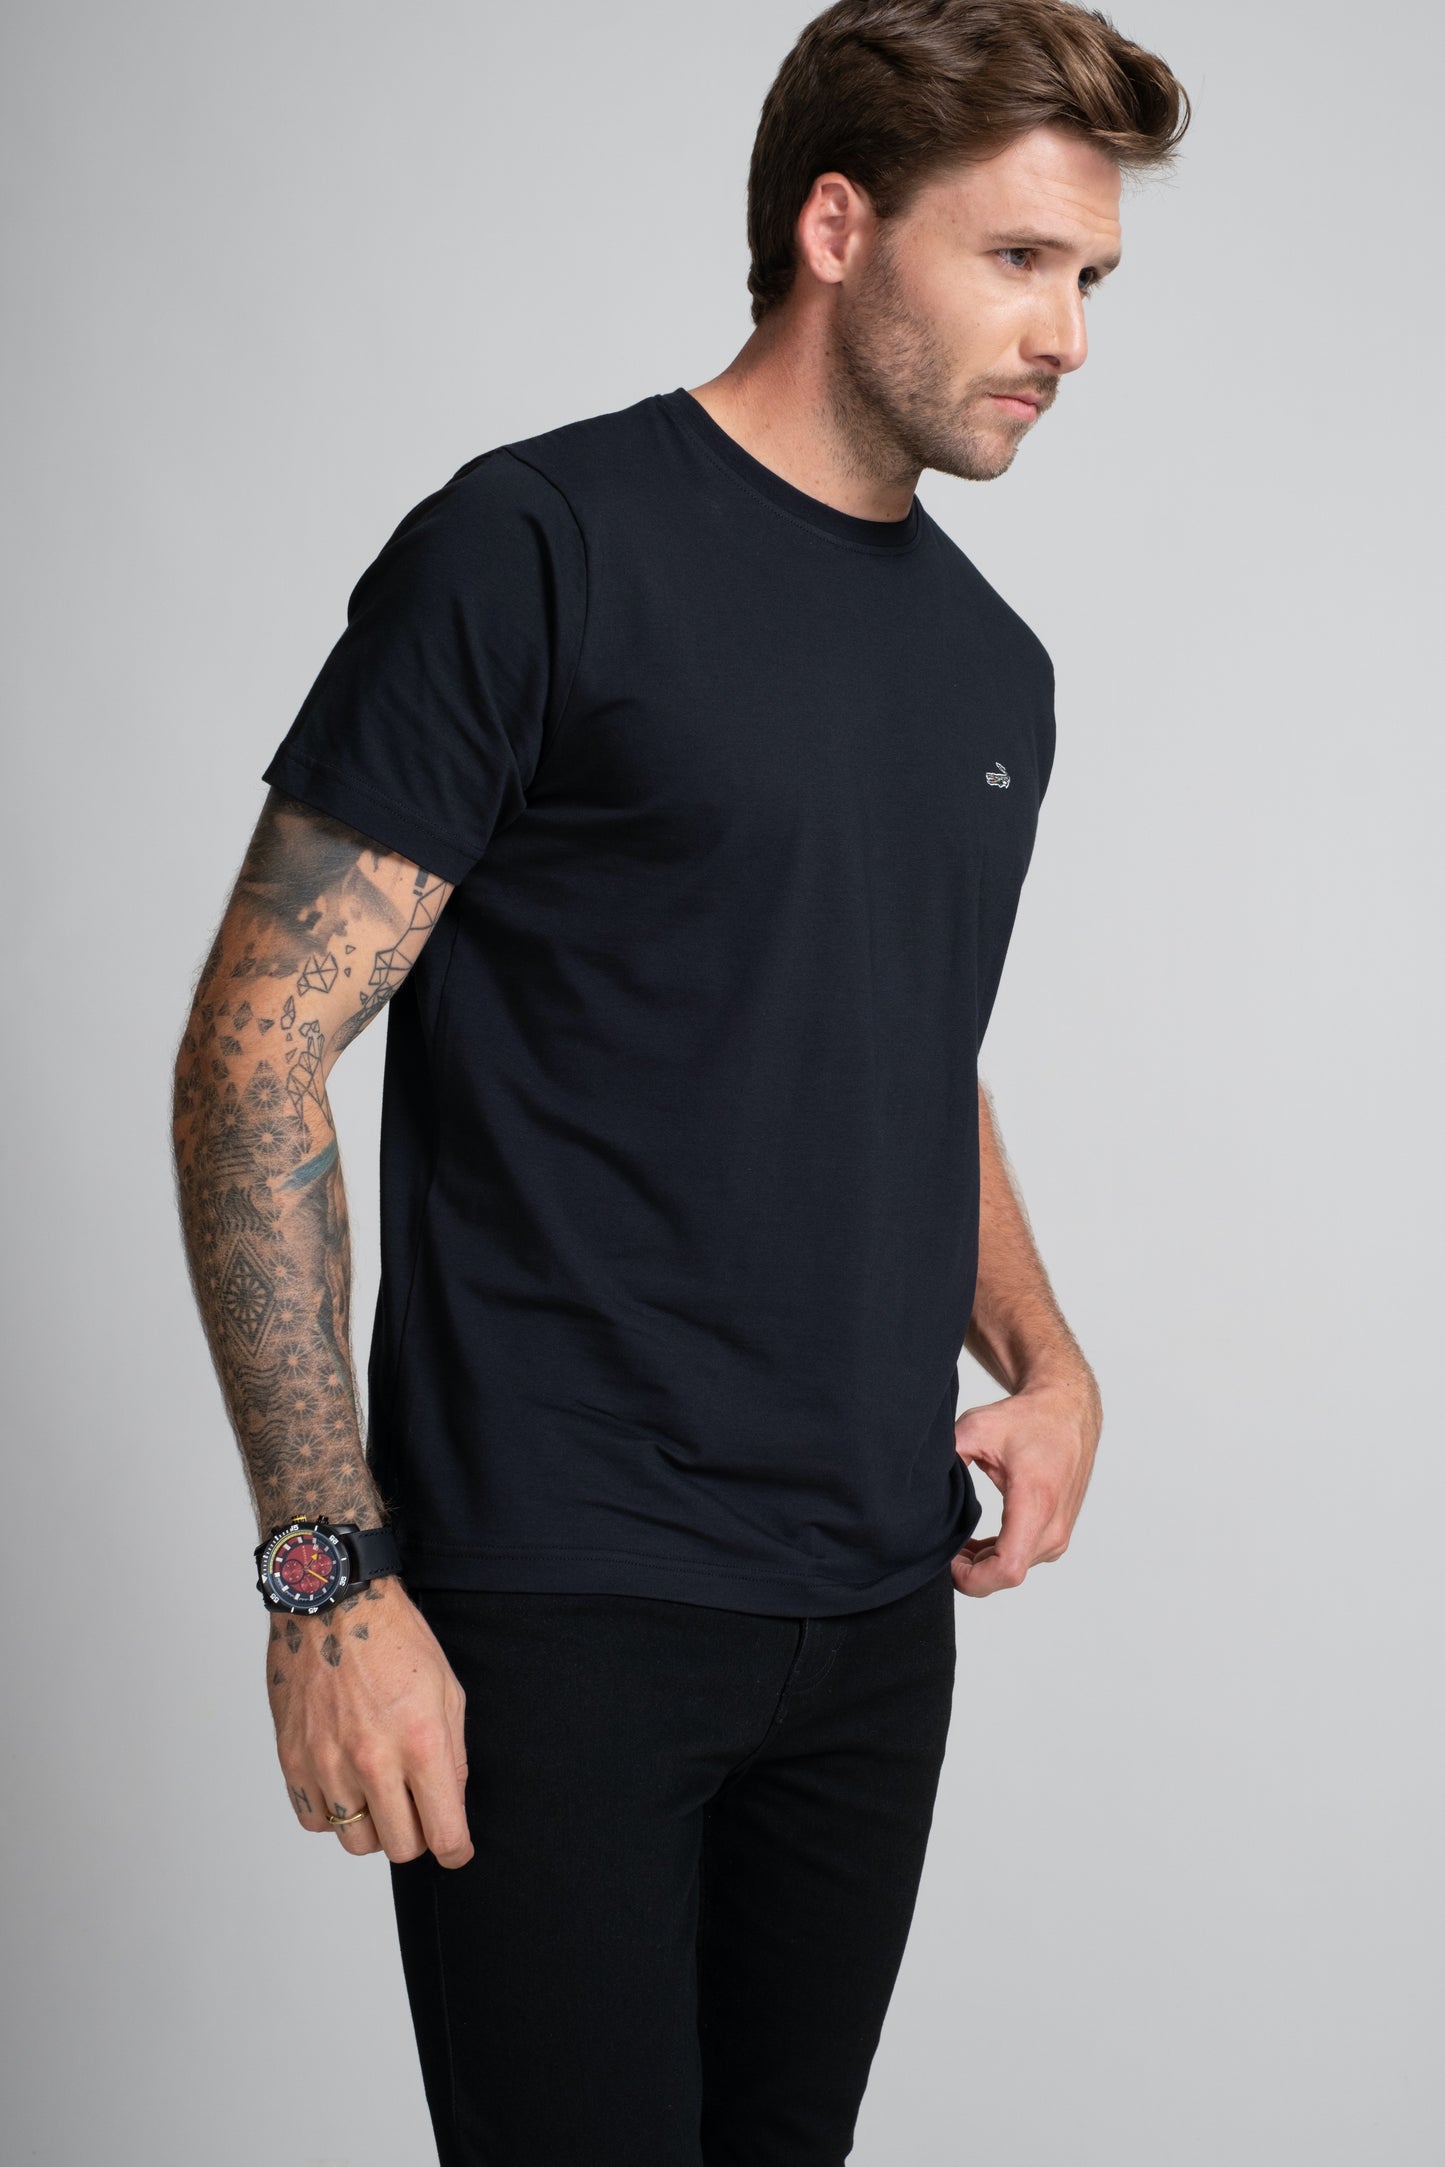 Classic Fit Short sleeves-CasualCrew Neck - Black Inck